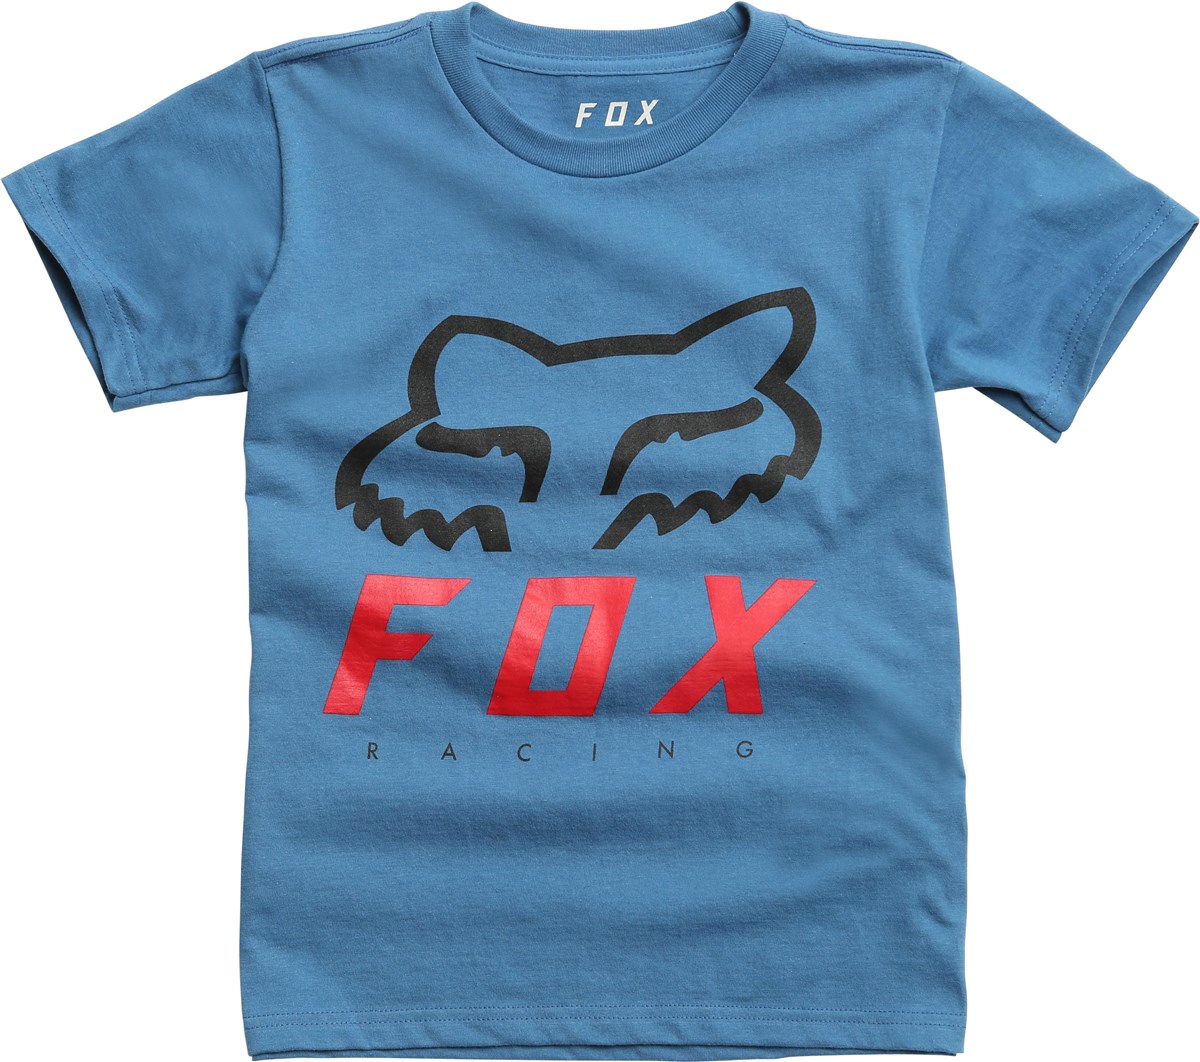 Fox Clothing Heritage Forger Kids Short Sleeve Tee product image